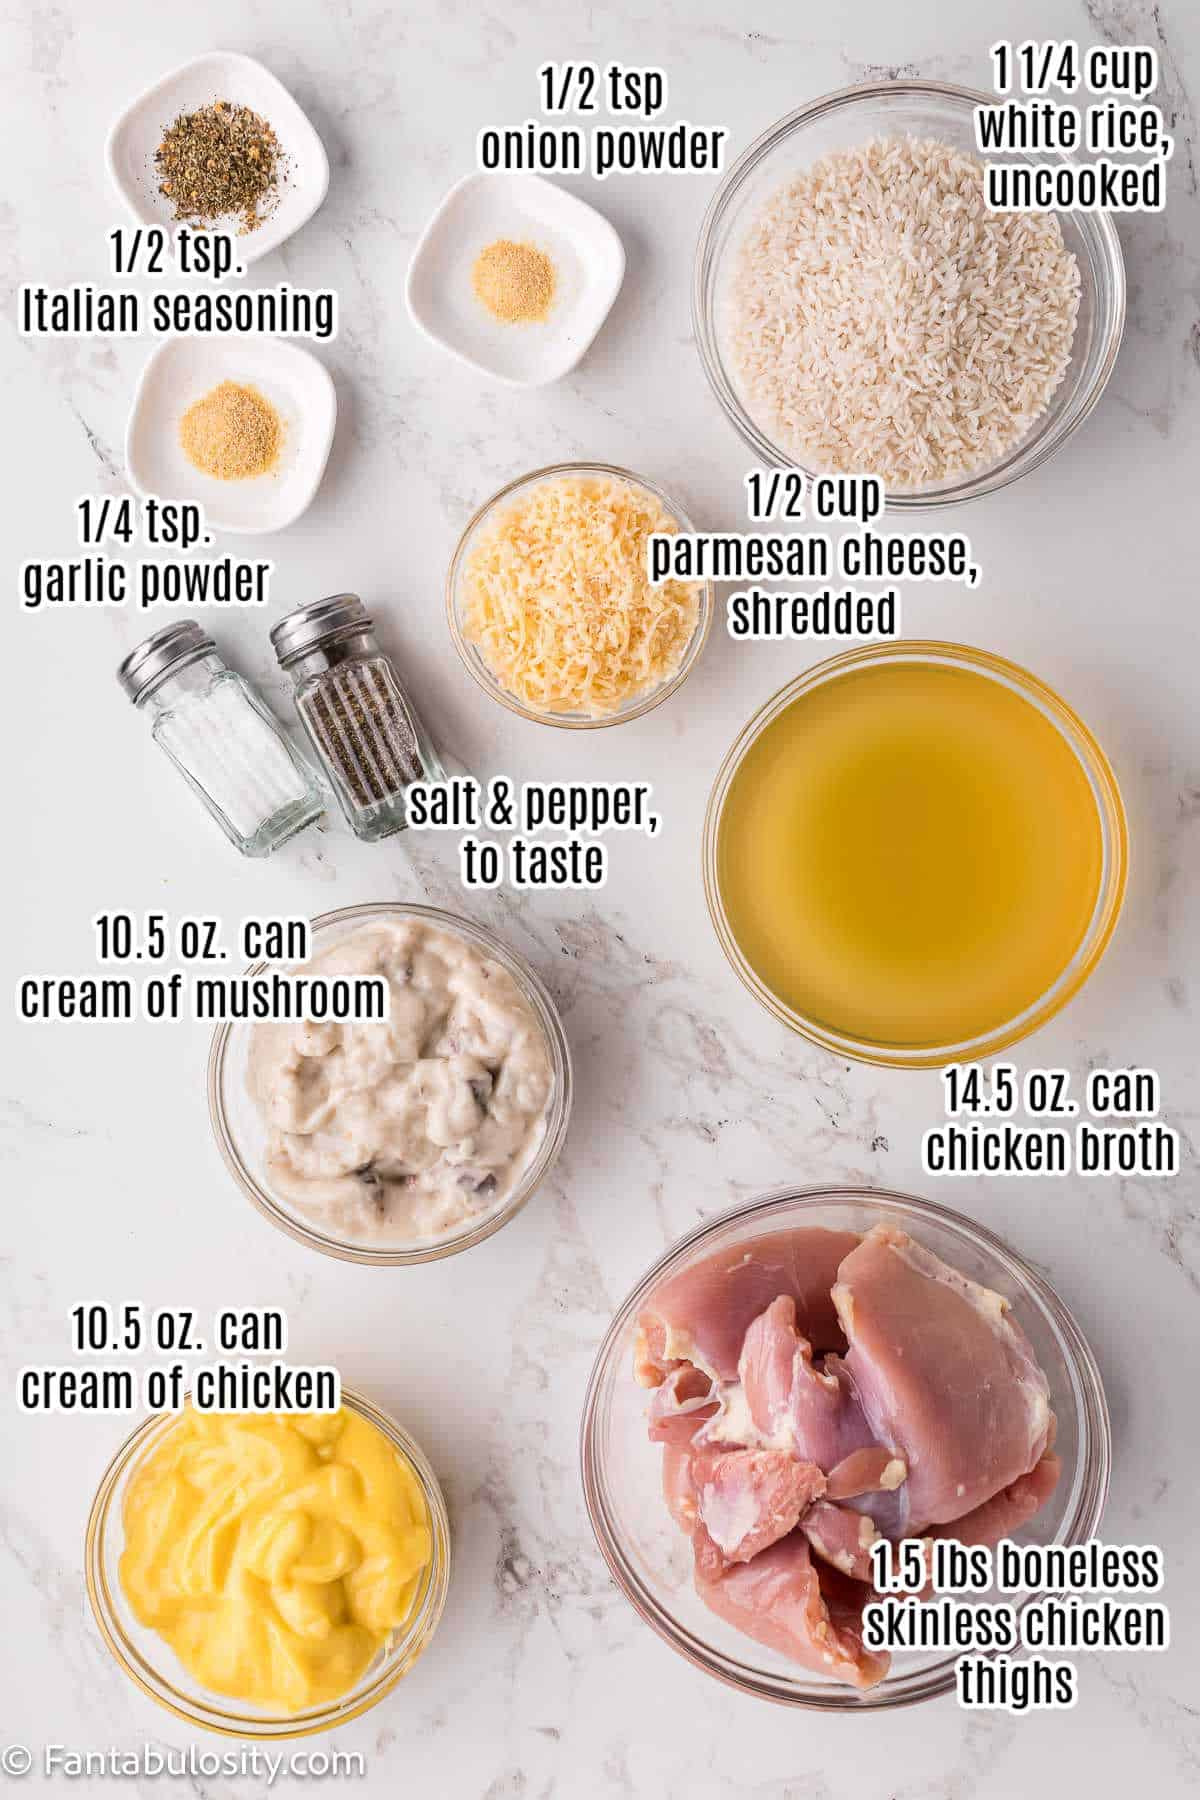 Labeled ingredients for chicken and rice.